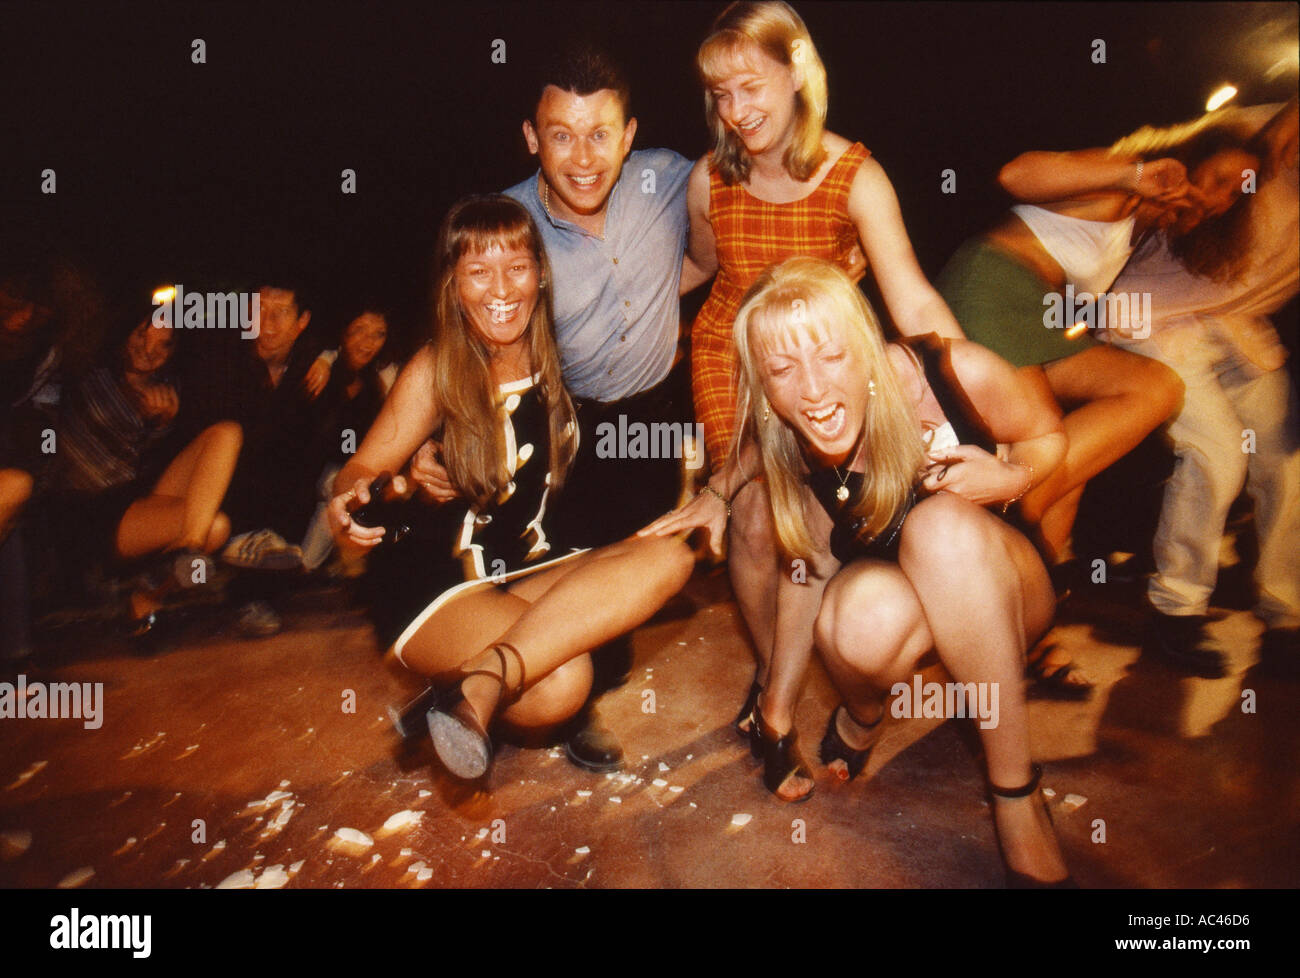 CLUB 18 30 DRINKING BOOZING PARTYING Stock Photo